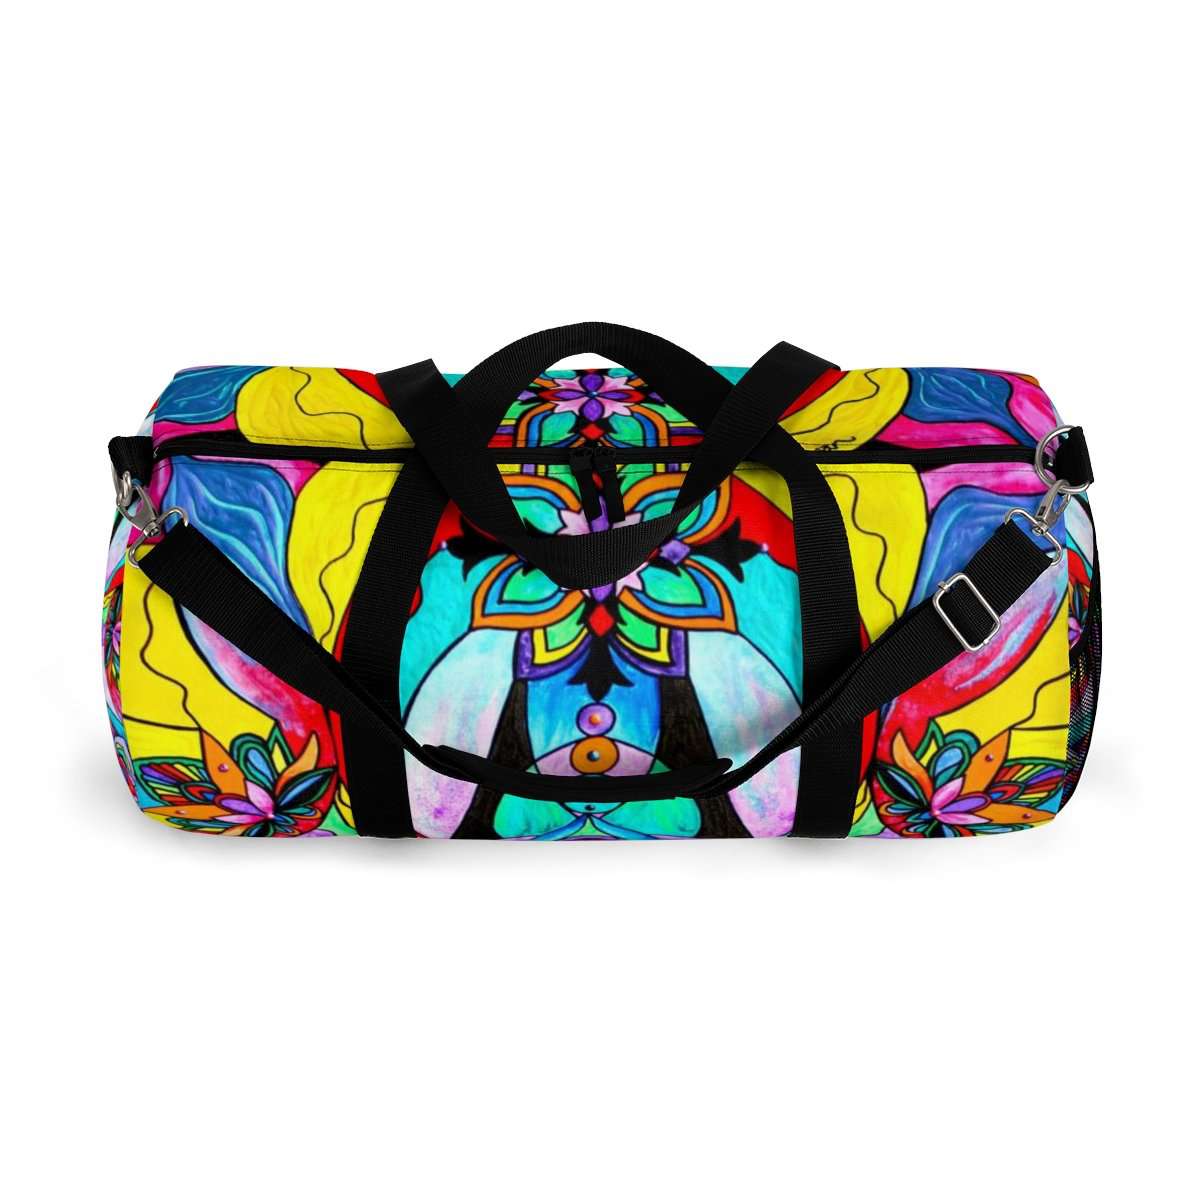 a-place-to-buy-receive-duffle-bag-online-now_10.jpg